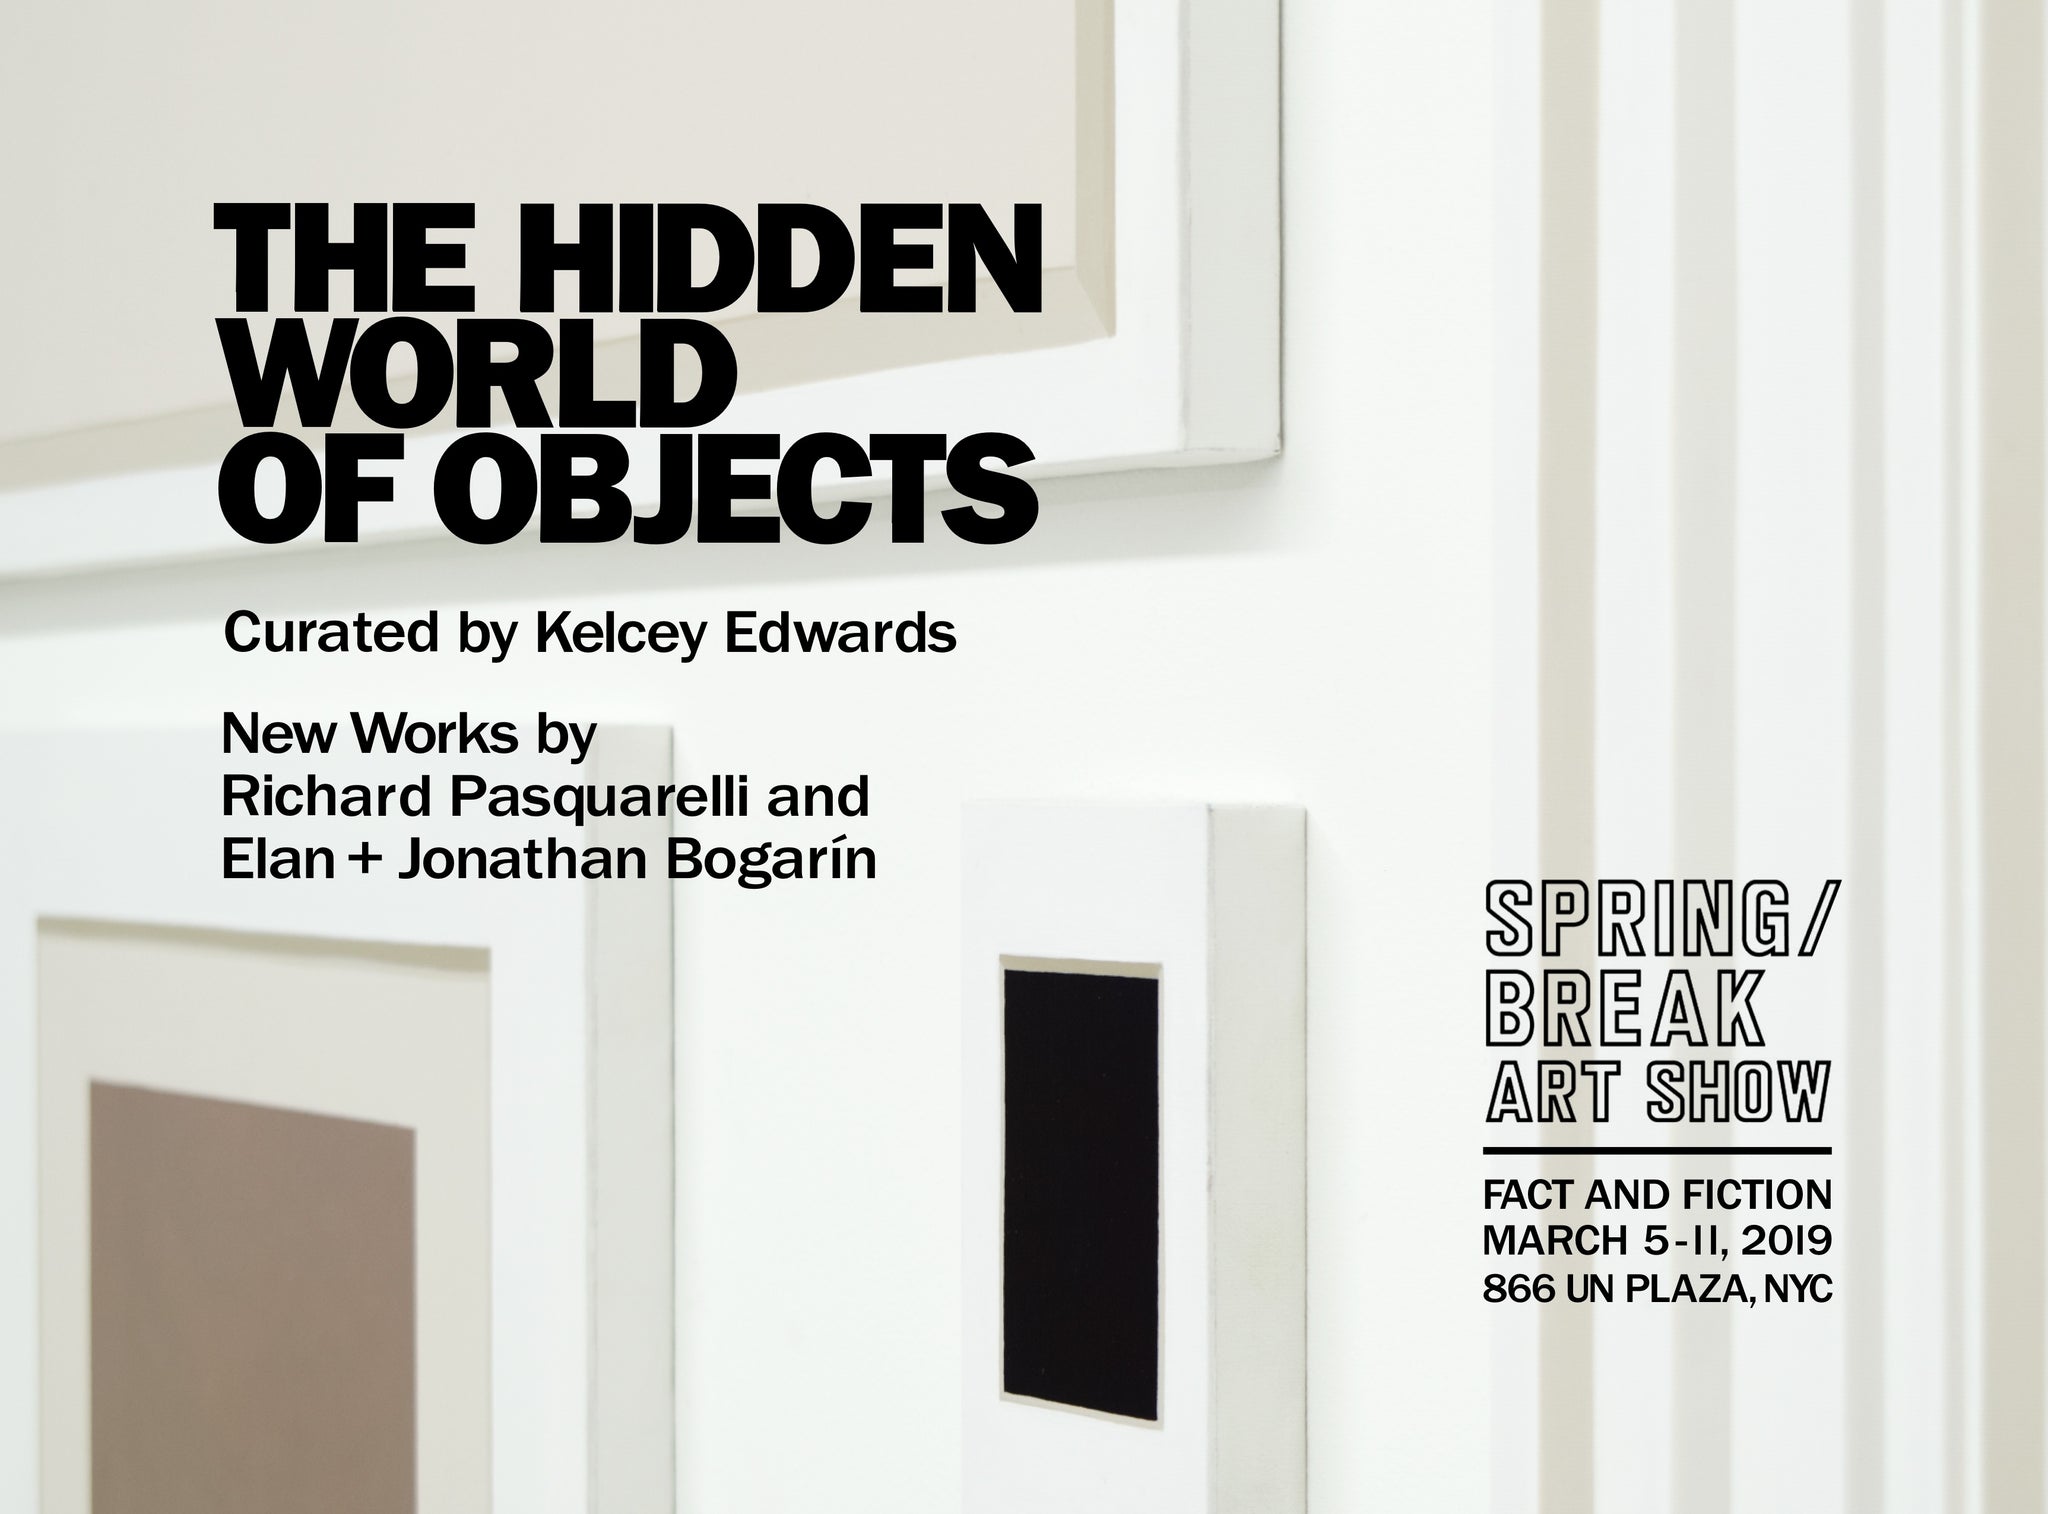 Kelcey Edwards, "The Hidden World of Objects Catalogue"